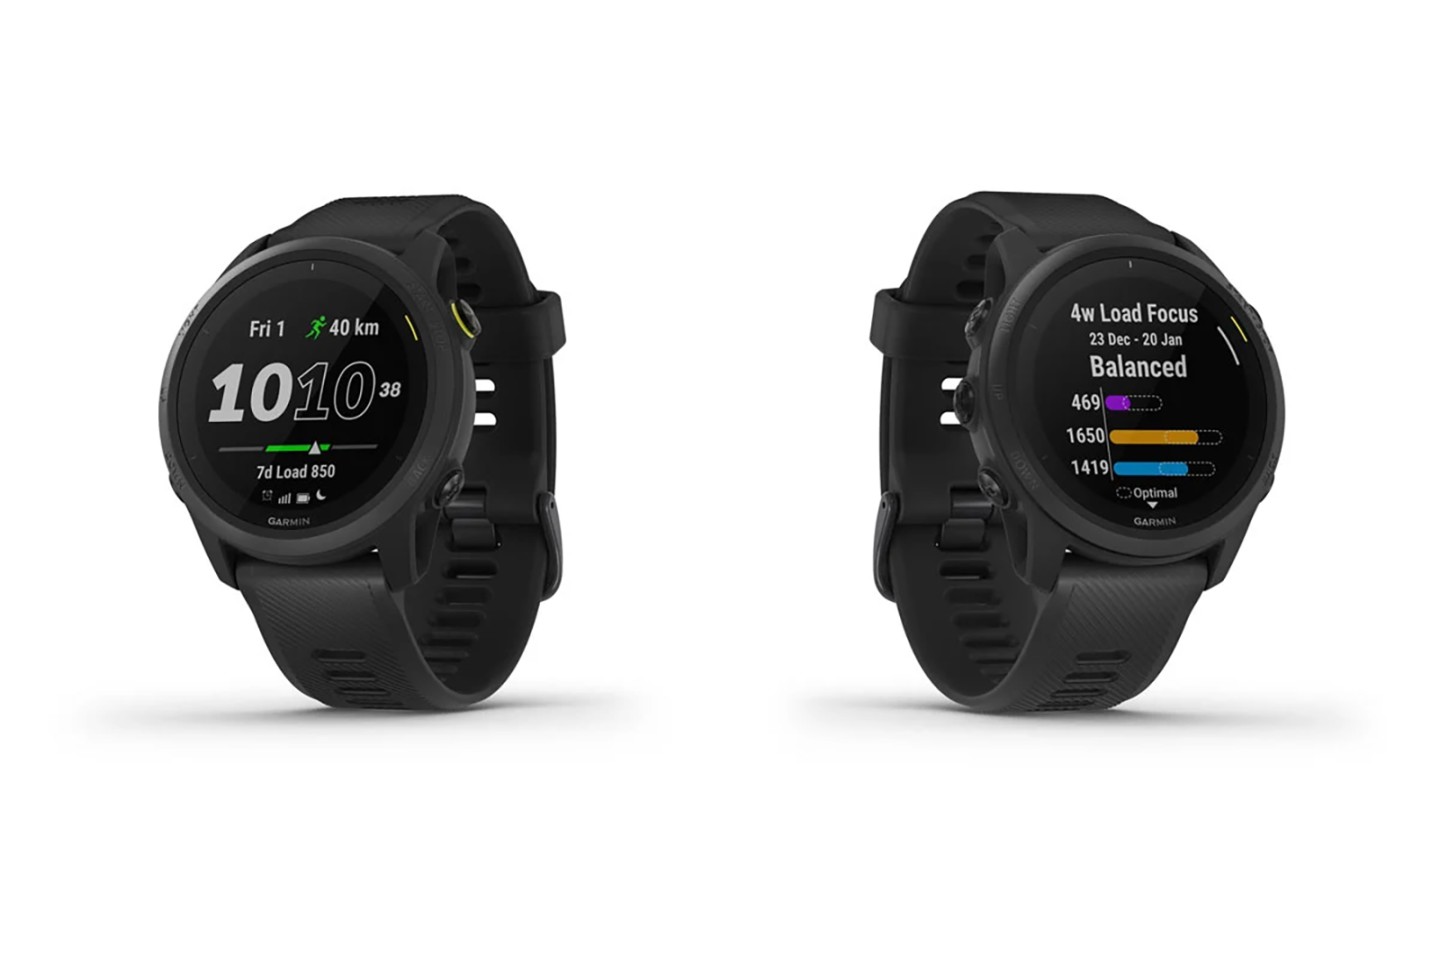 The Garmin Forerunner 745 comes absolutely packed with features